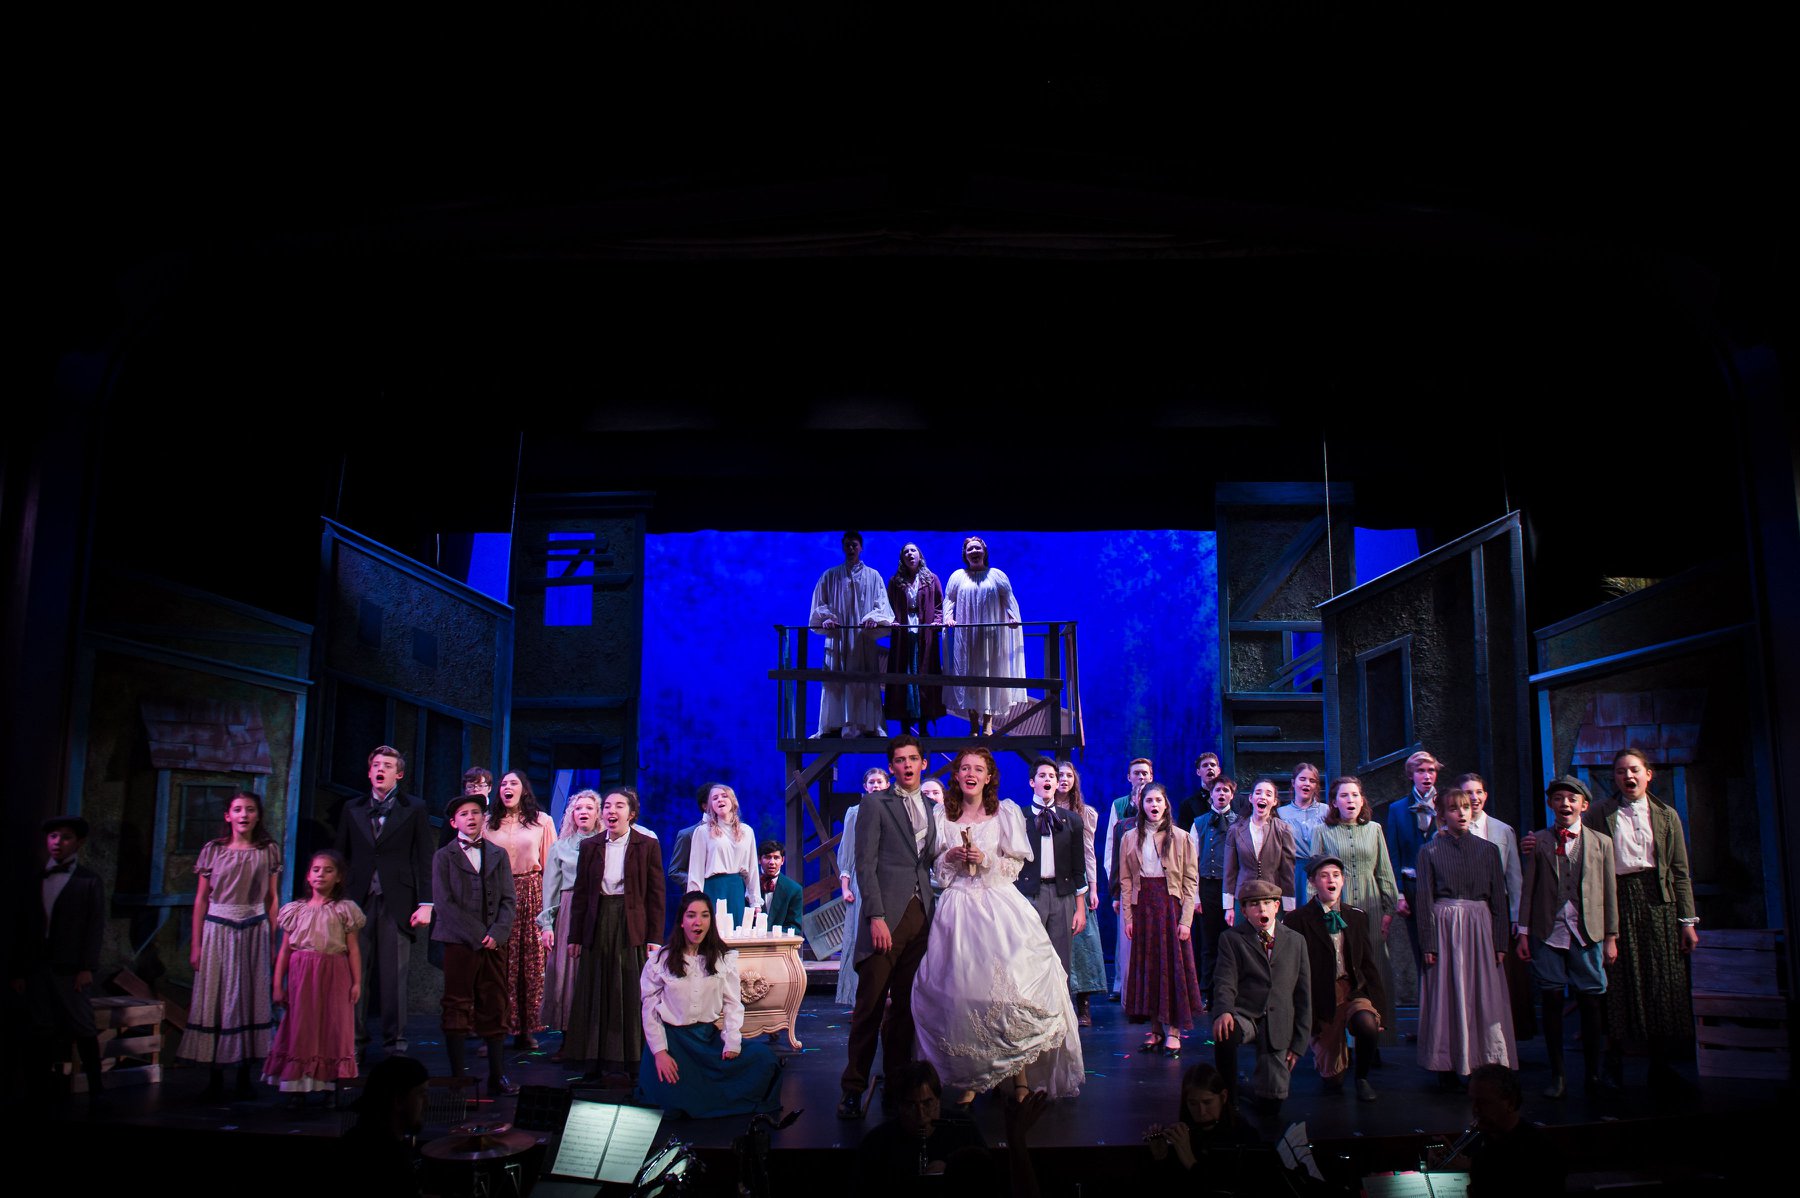 The cast of Ovations Theatre's Les Misérables: School Edition. Photo by Lock & Company.